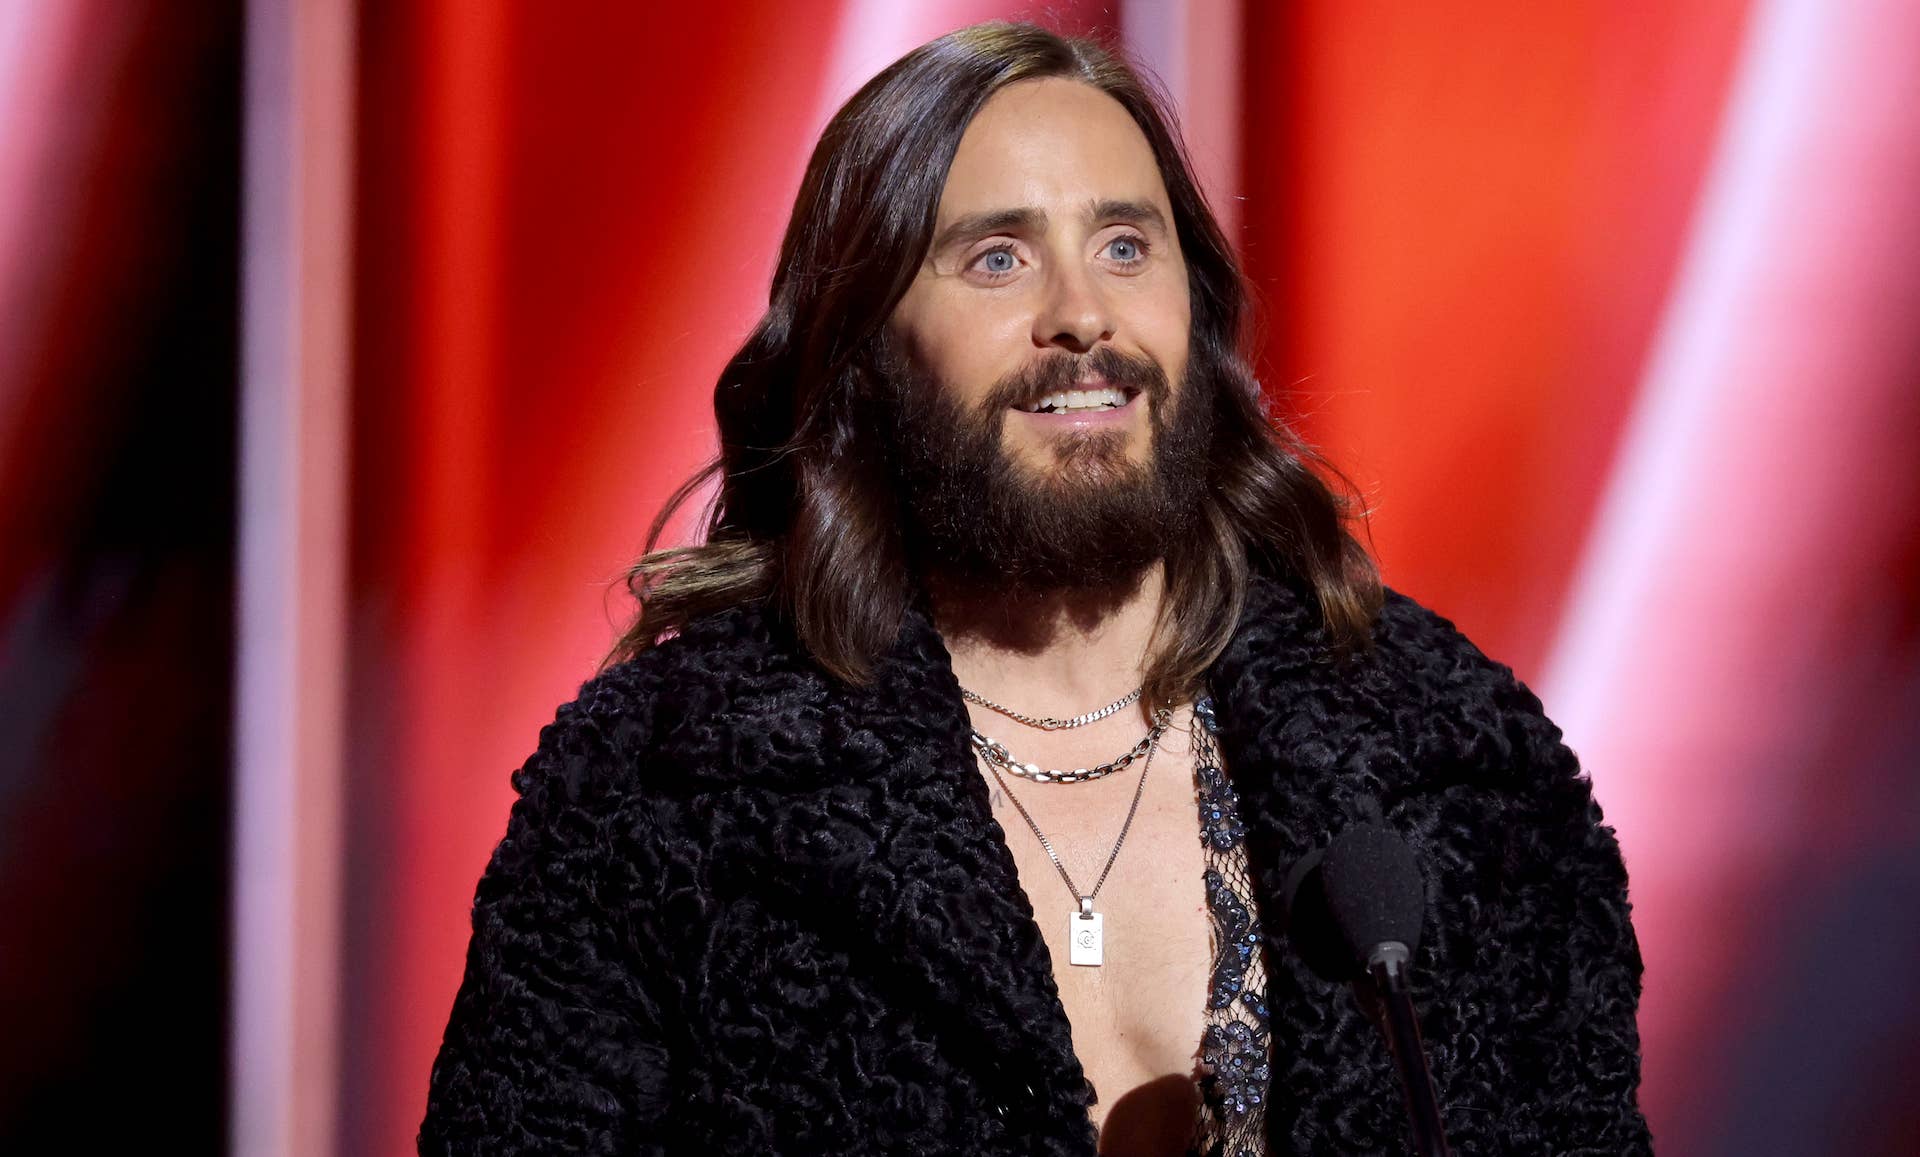 Jared Leto at the 64th Annual Grammy Awards